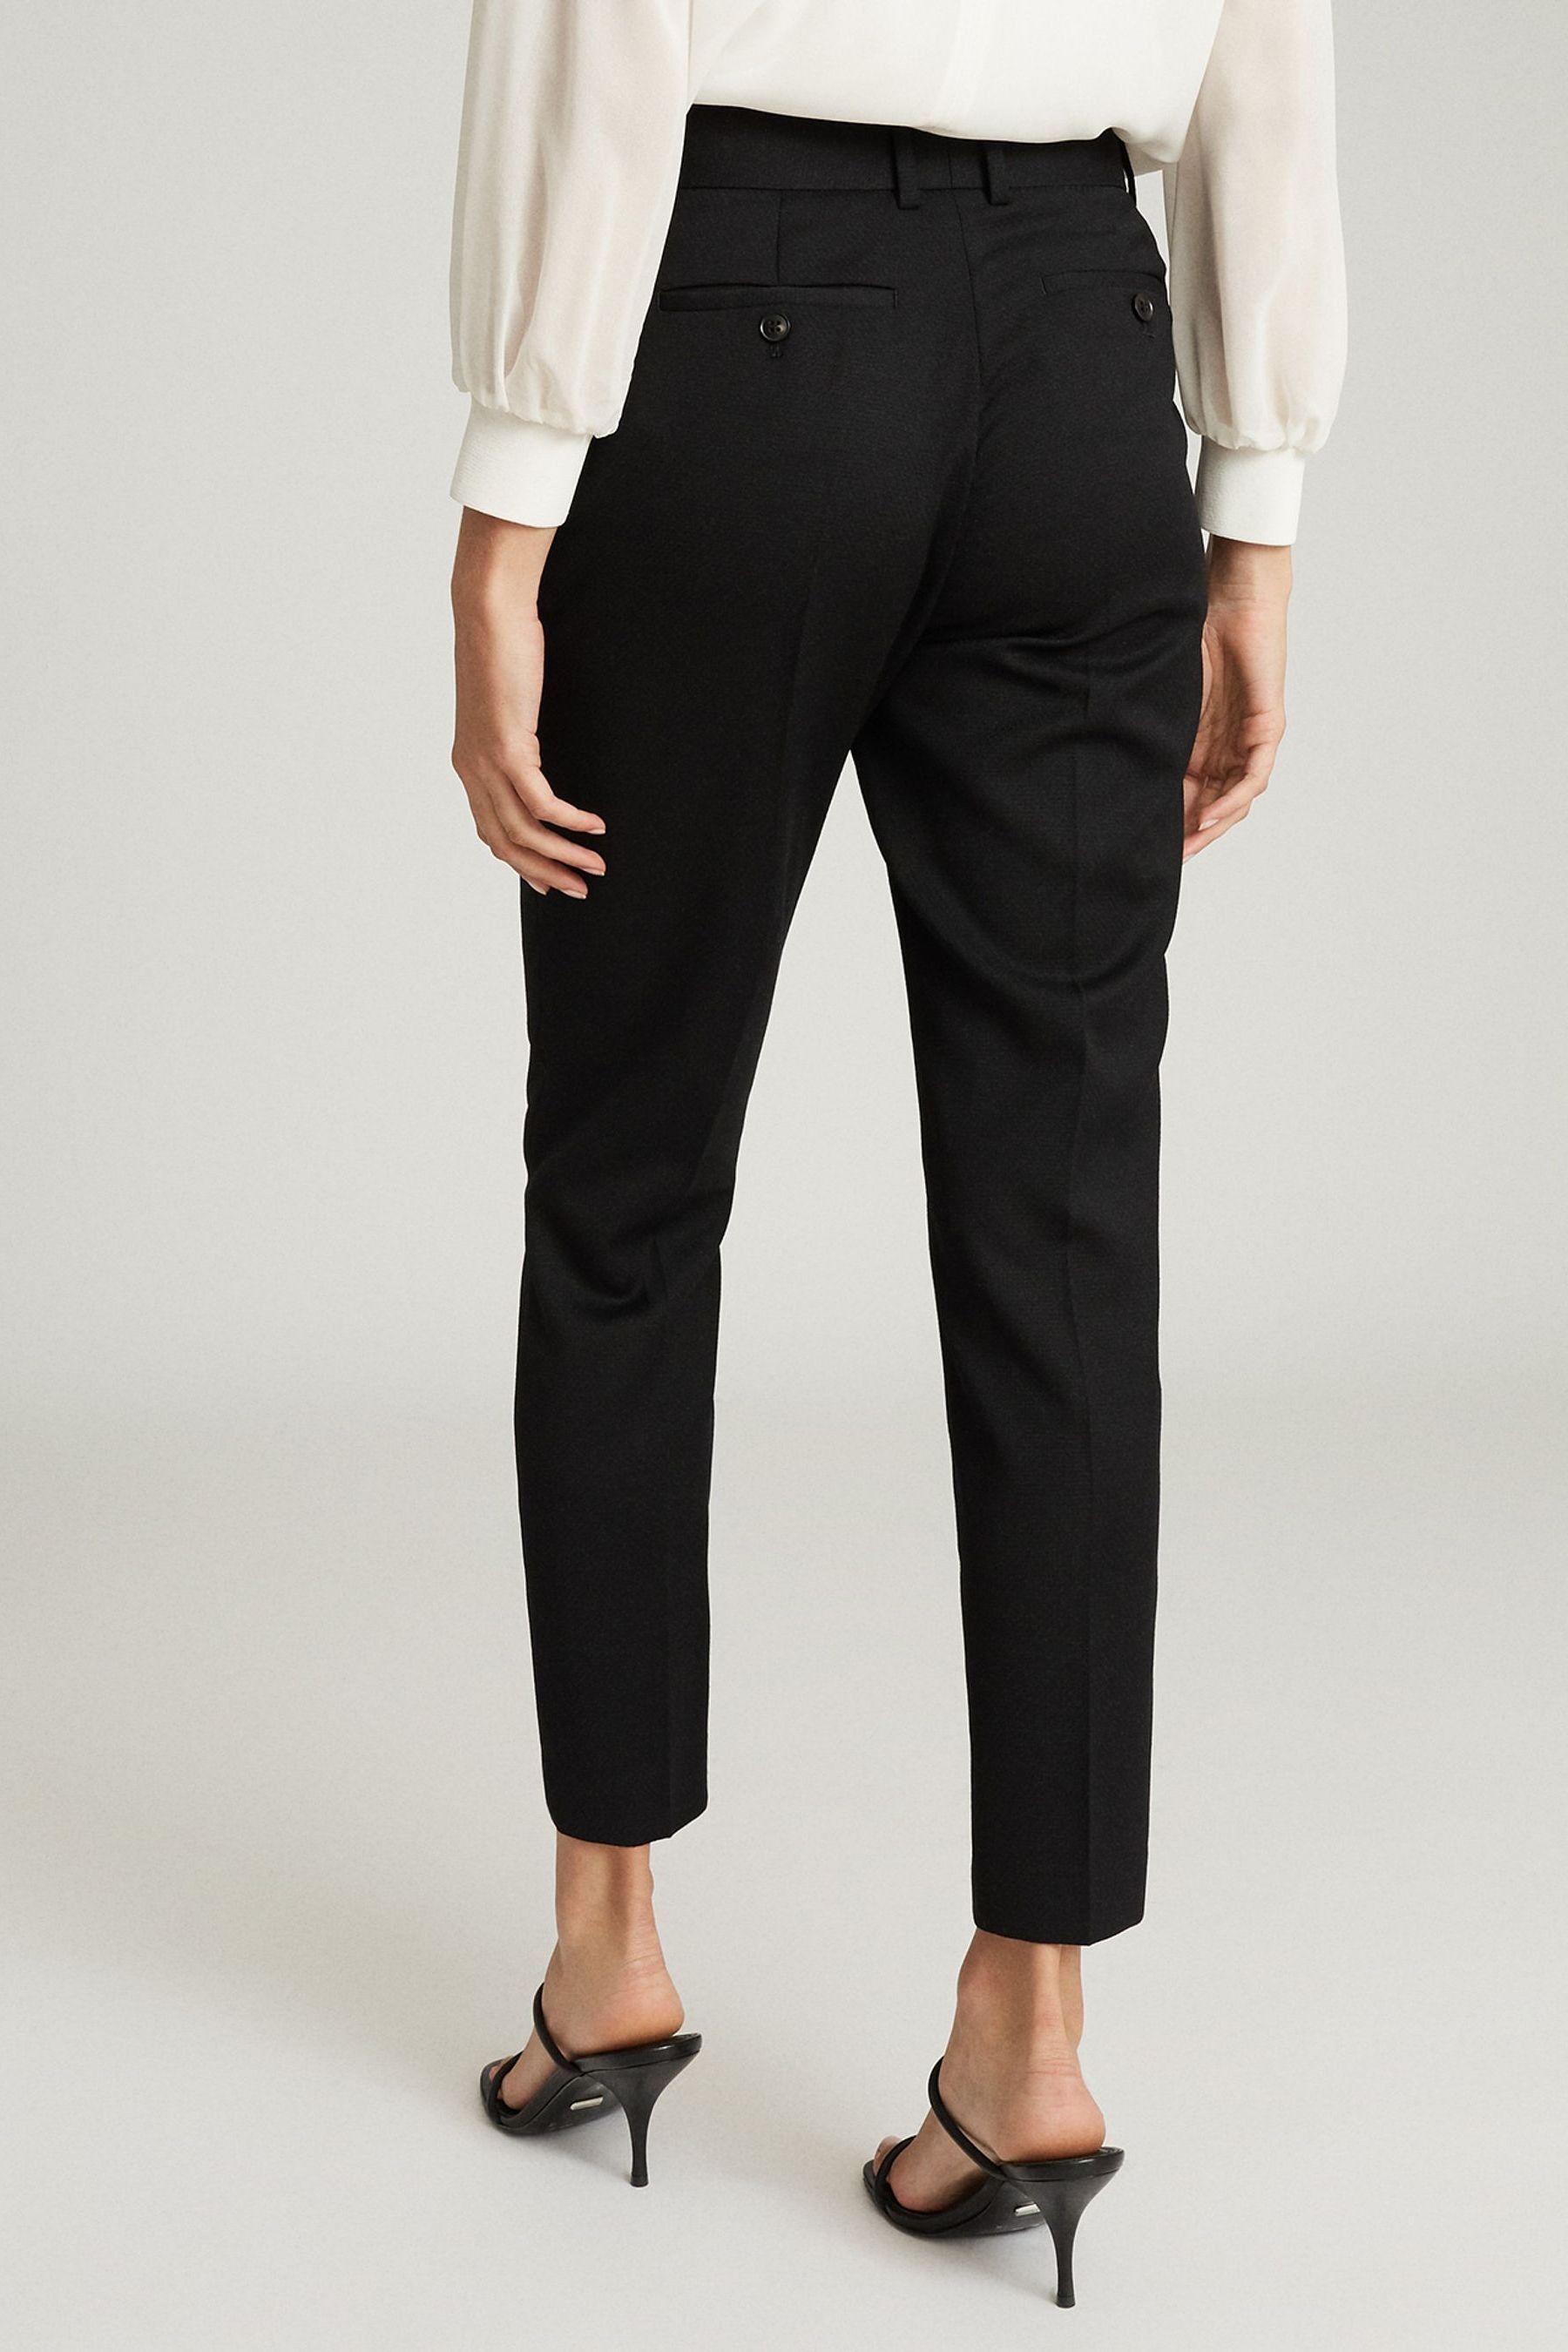 Buy Reiss Hayes Slim Fit Tailored Trousers from the Next UK online shop